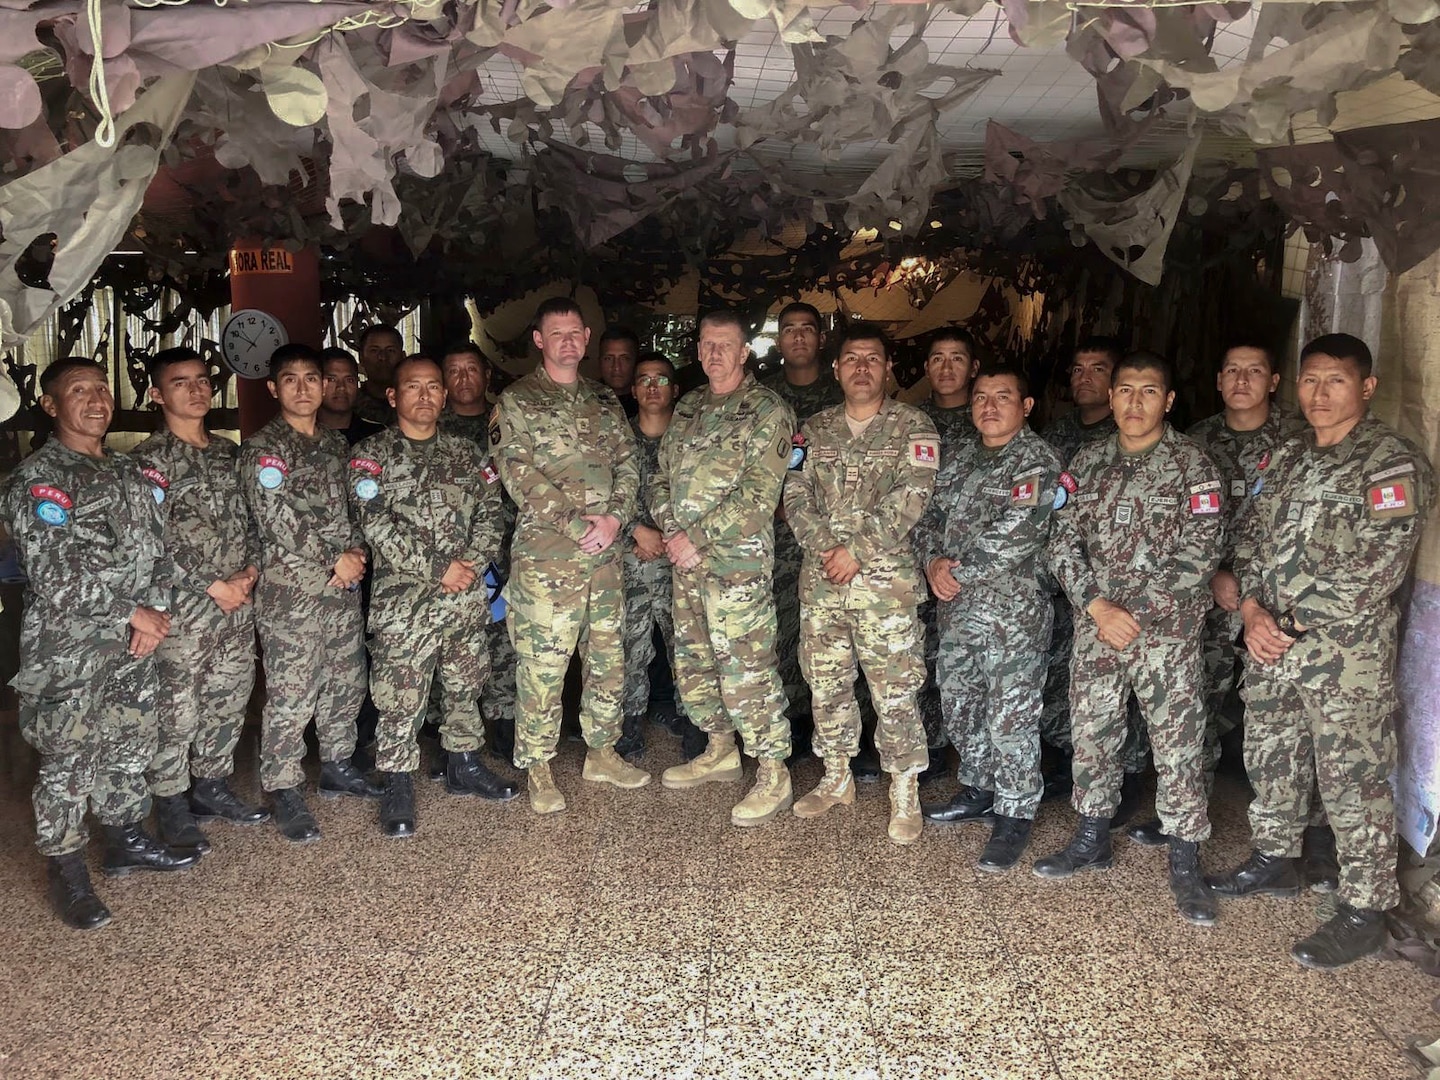 West Virginia Army National Guard (WVARNG) Master Sgt. Ricky Baker and Sgt. 1st Class Joshua Dunlap pose for a photo with members of the Peruvian Army following the completion of a Subject Matter Expert Exchange (SMEE) Global Peace Operations Initiative (GPOI) mission held in Lima, Peru, Nov. 26 – 30, 2018. The SMEE GPOI mission with the Peruvian Army helped to improve maintenance support for Peru’s Training Center for Peace Operations upcoming mission to the Central African Republic and enhanced non-commissioned officer (NCO) development in their armed forces. (courtesy photo)